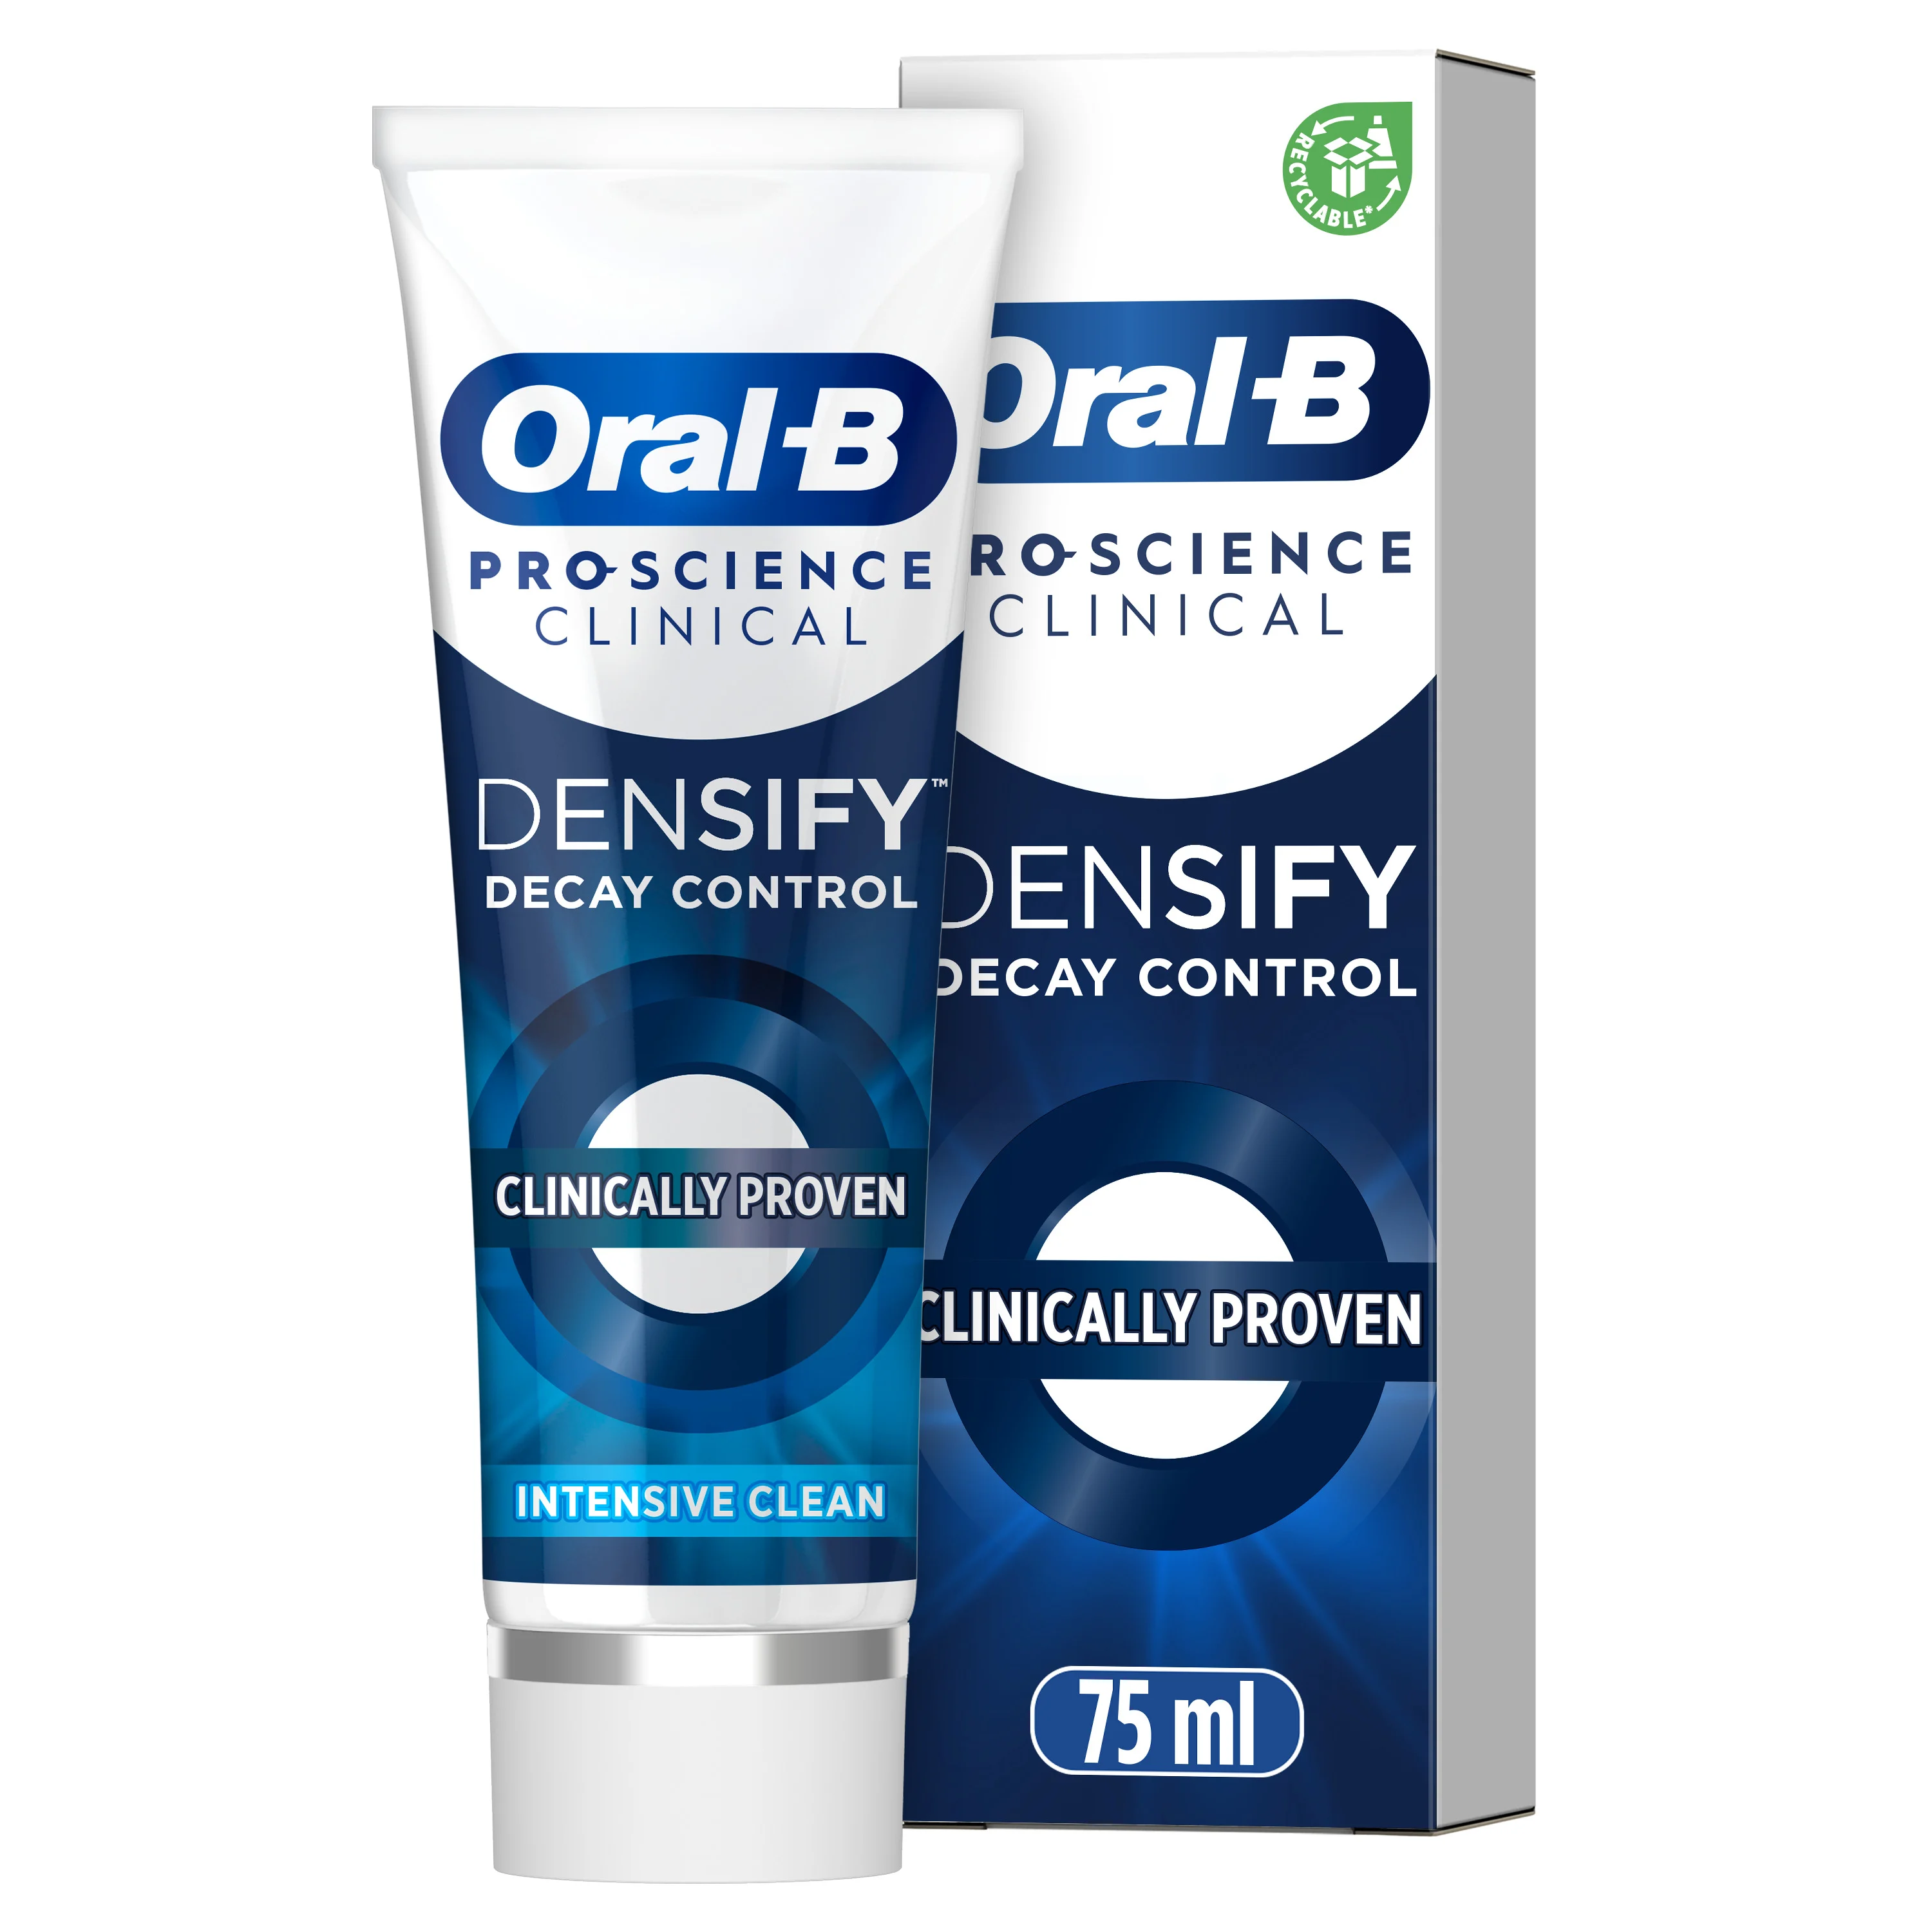 Oral-B Pro-Science Clinical Densify Decay Control Intensive Clean-tandpasta - Main 